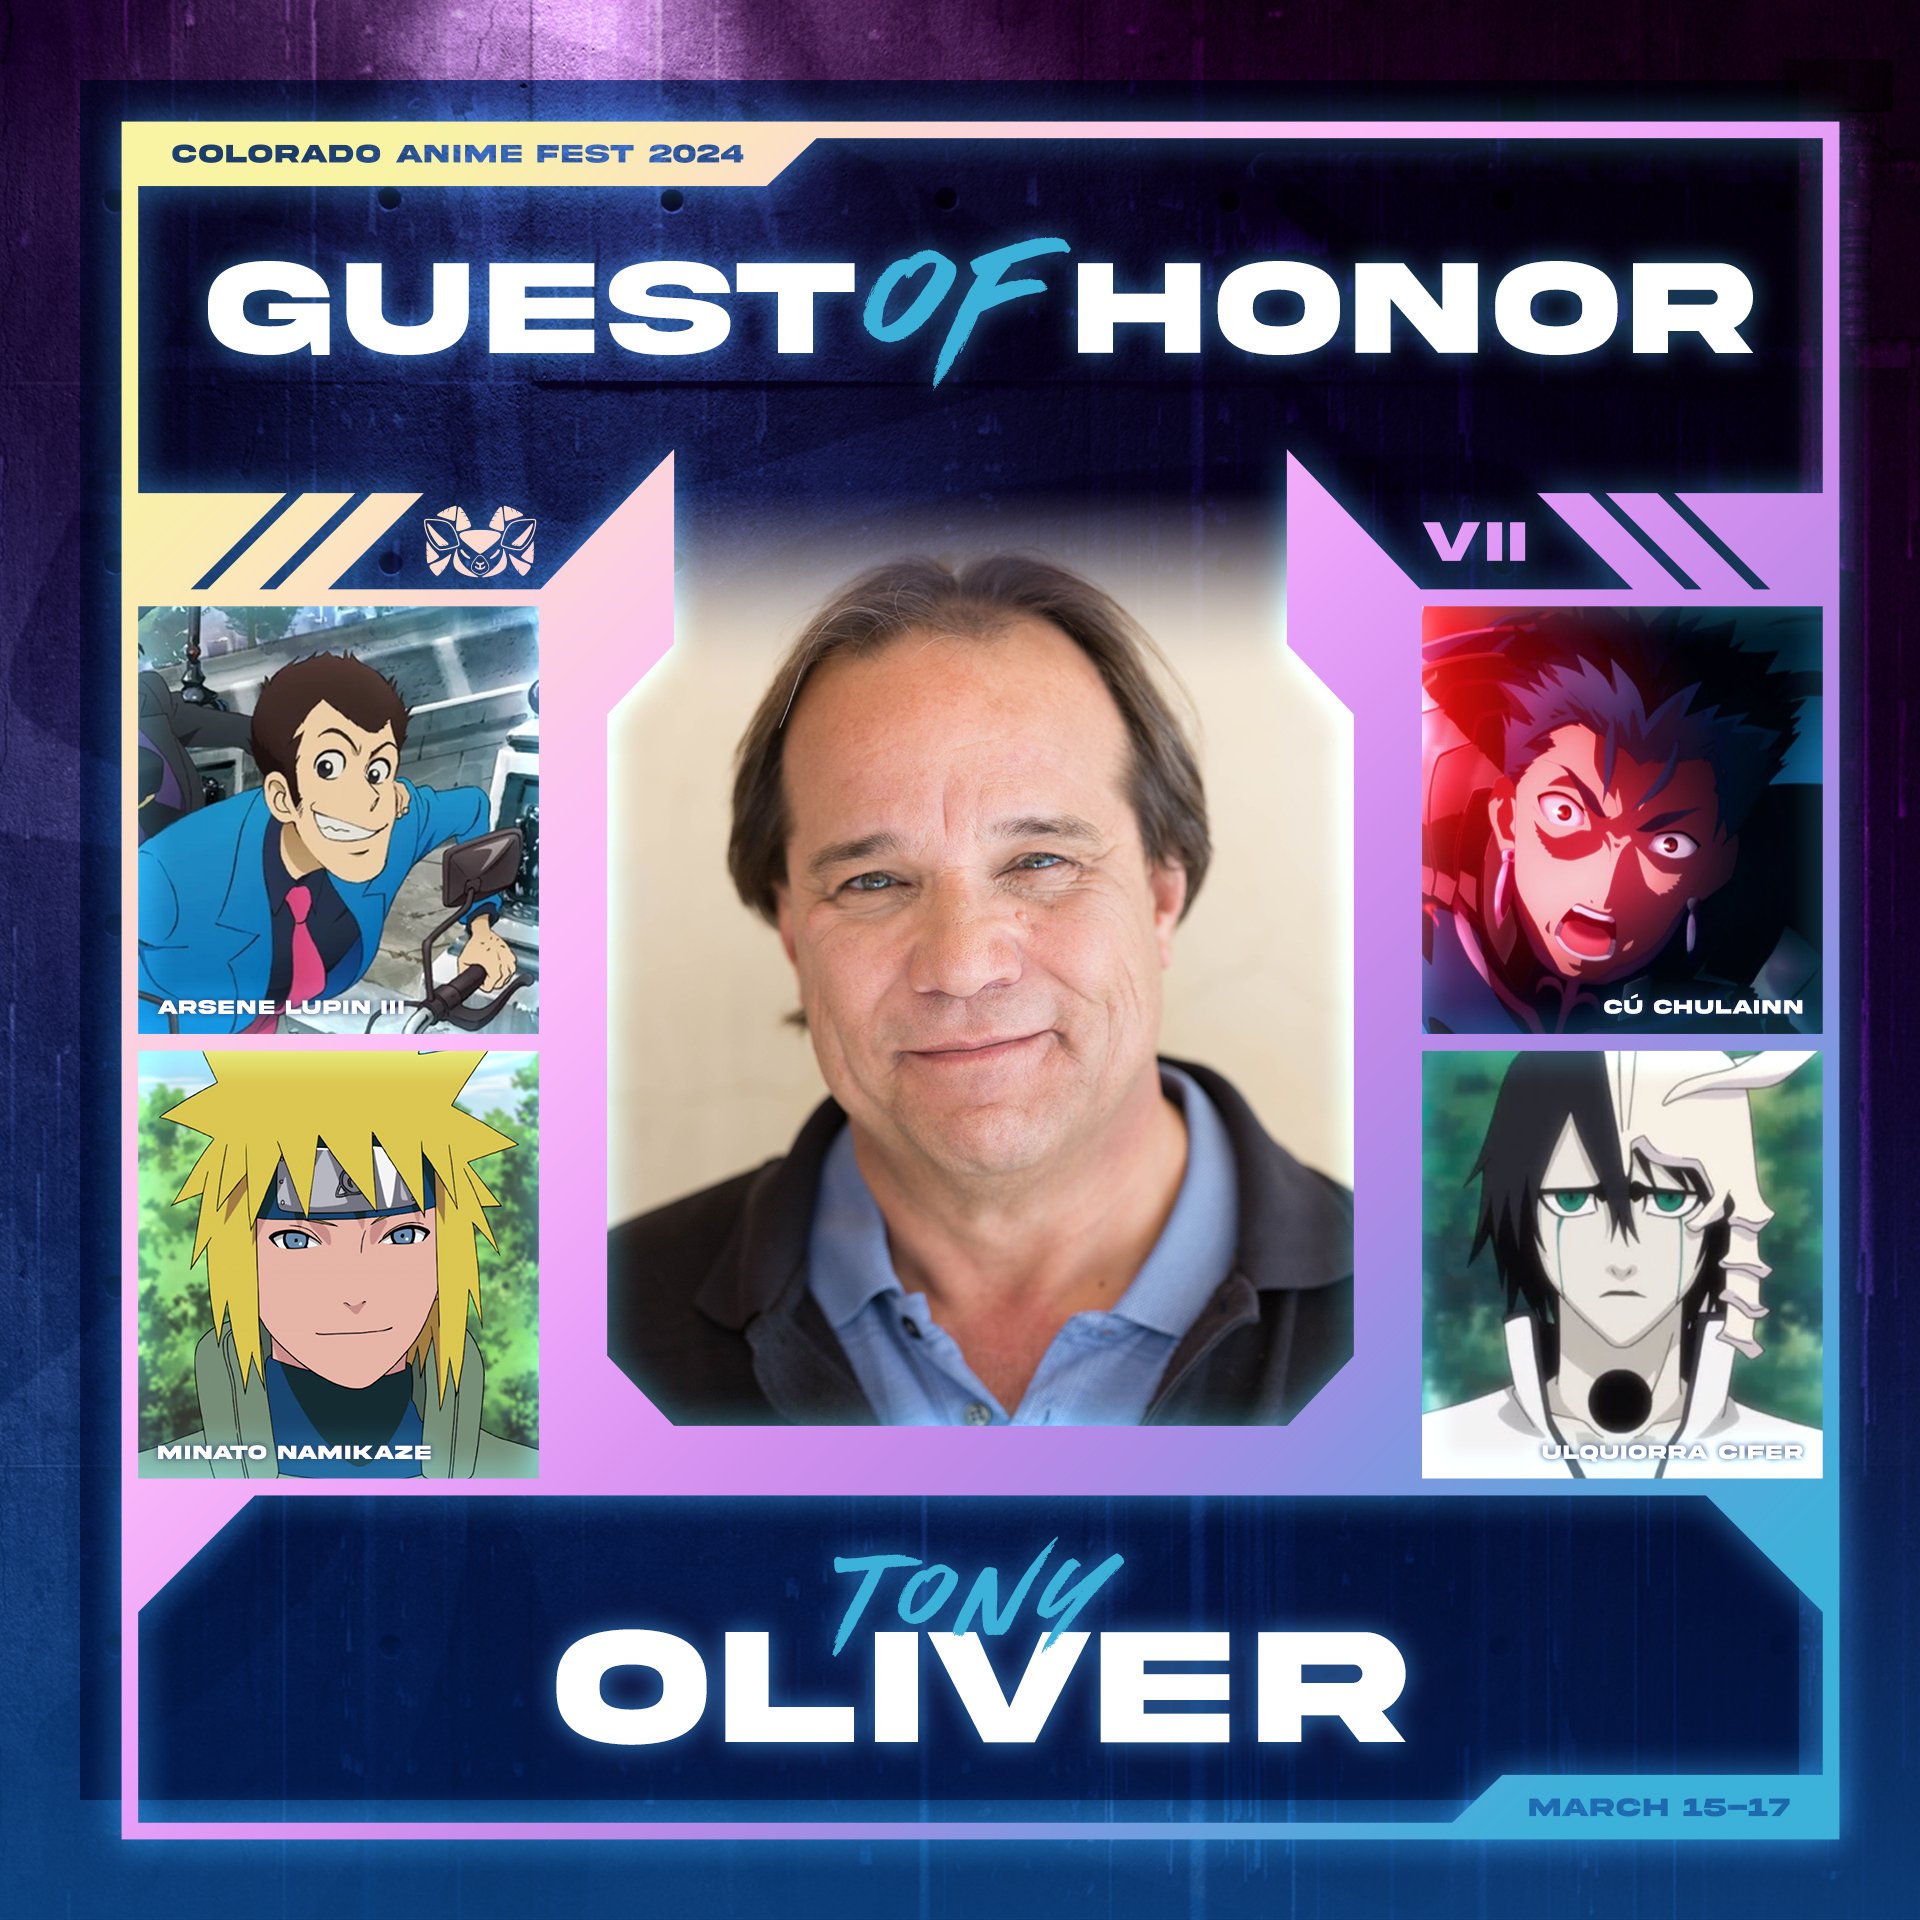 COAF_2024_Guest_Announcement_Oliver.jpg